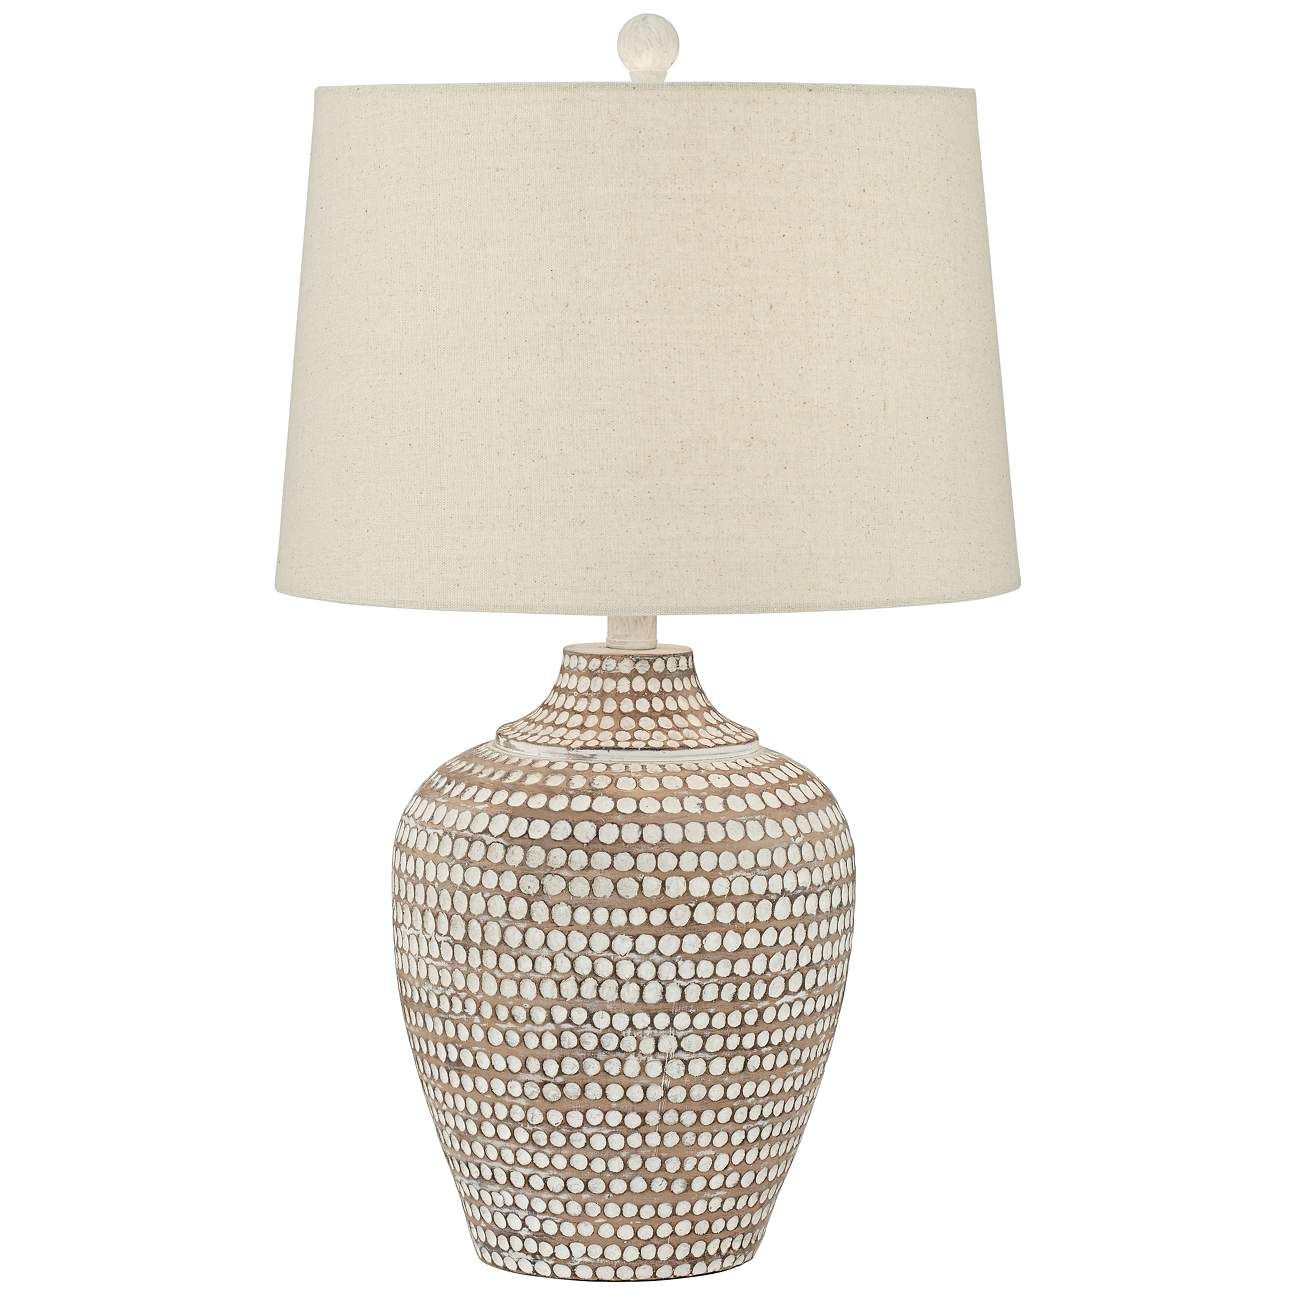 Alese Neutral Earth Finish Textured Dot Jug Table Lamp | Lamps Plus